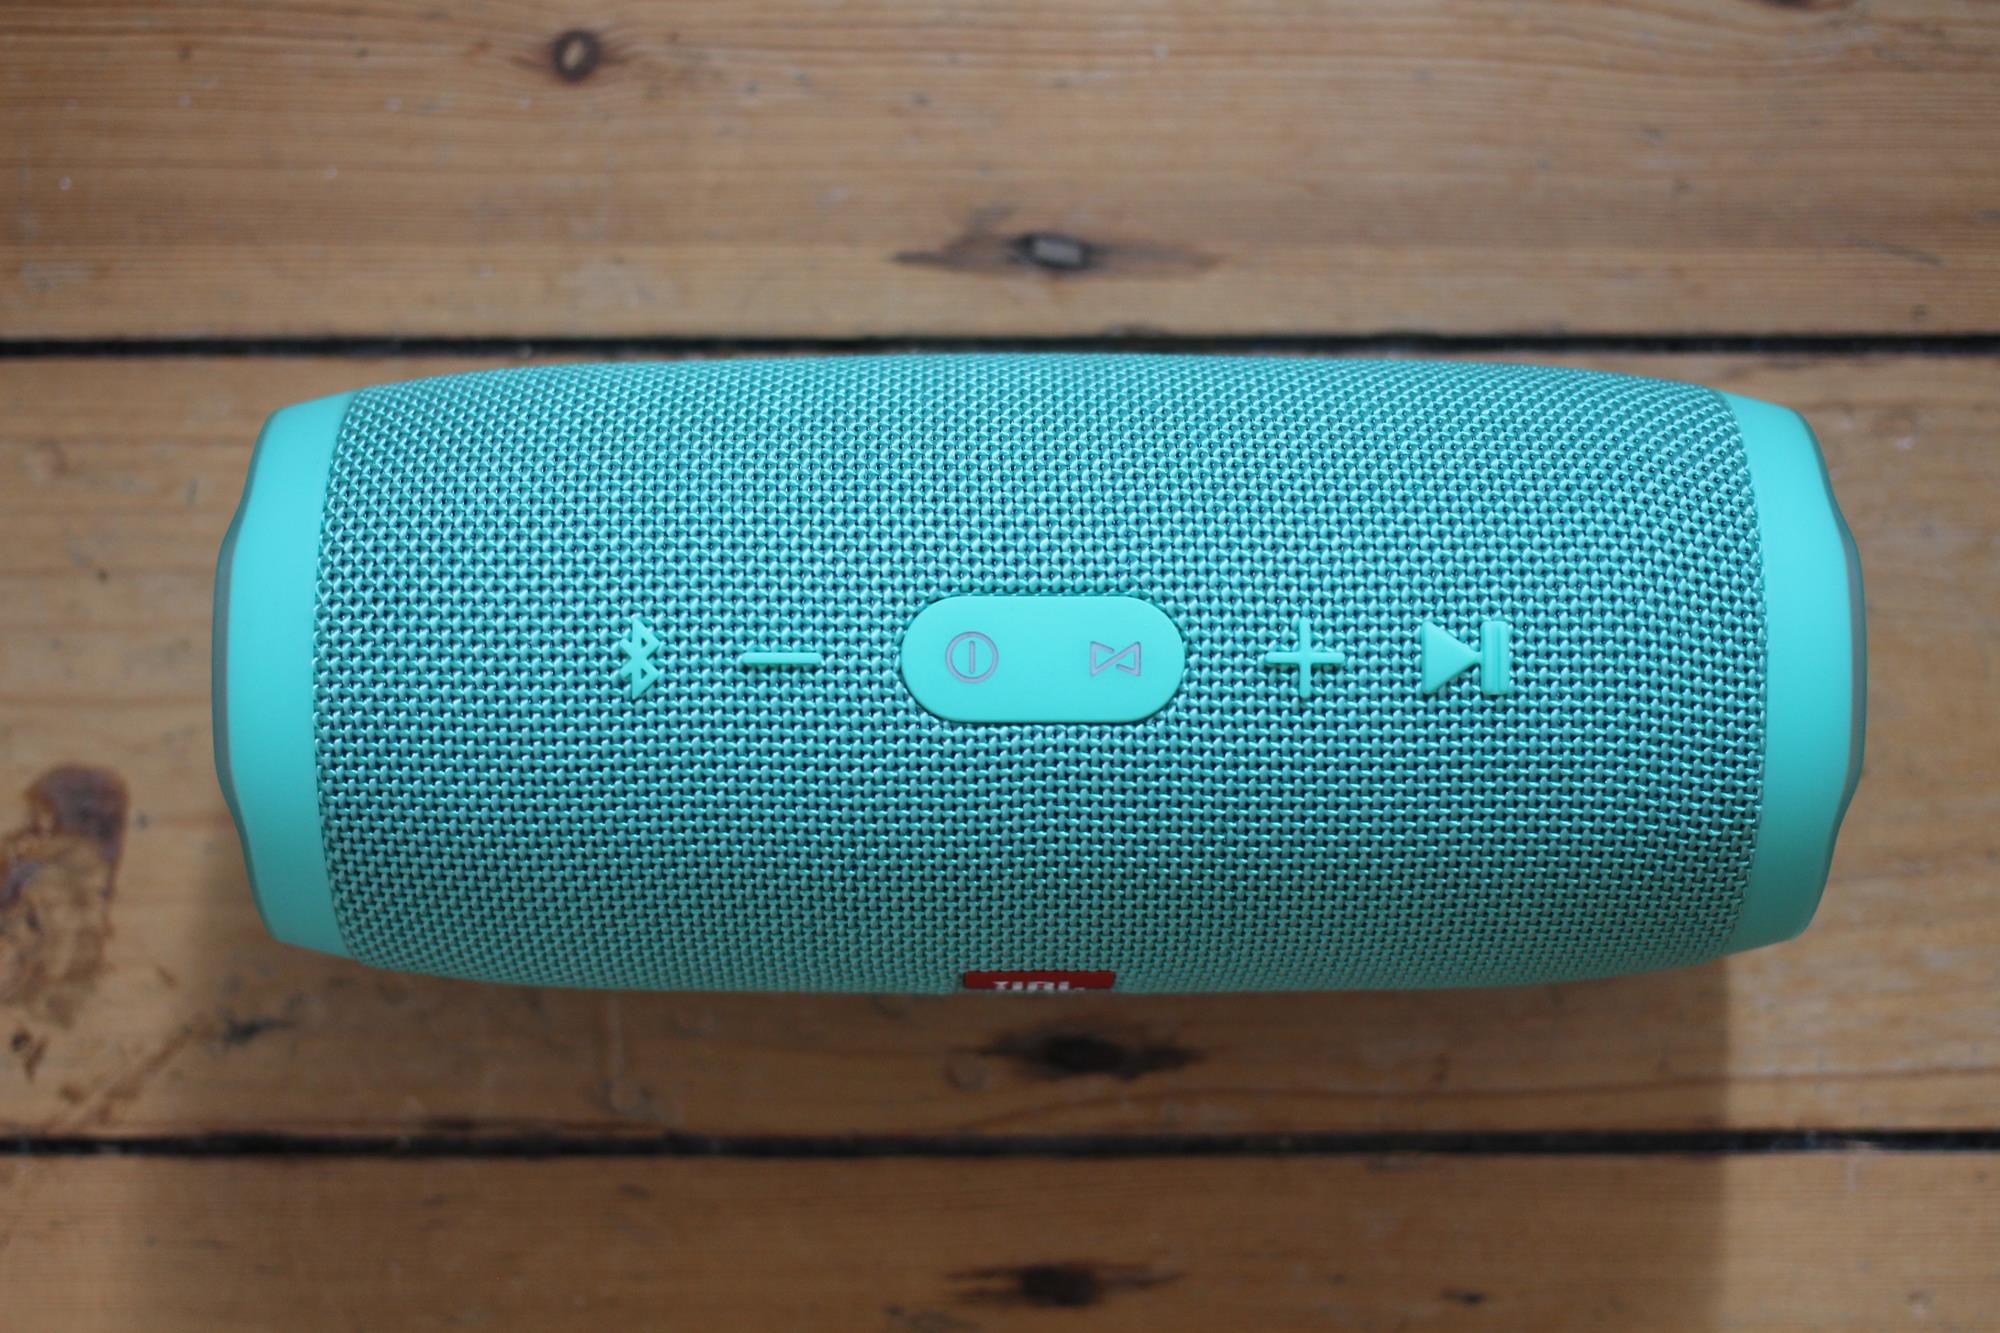 JBL Charge 3 portable speaker in teal on wooden background.